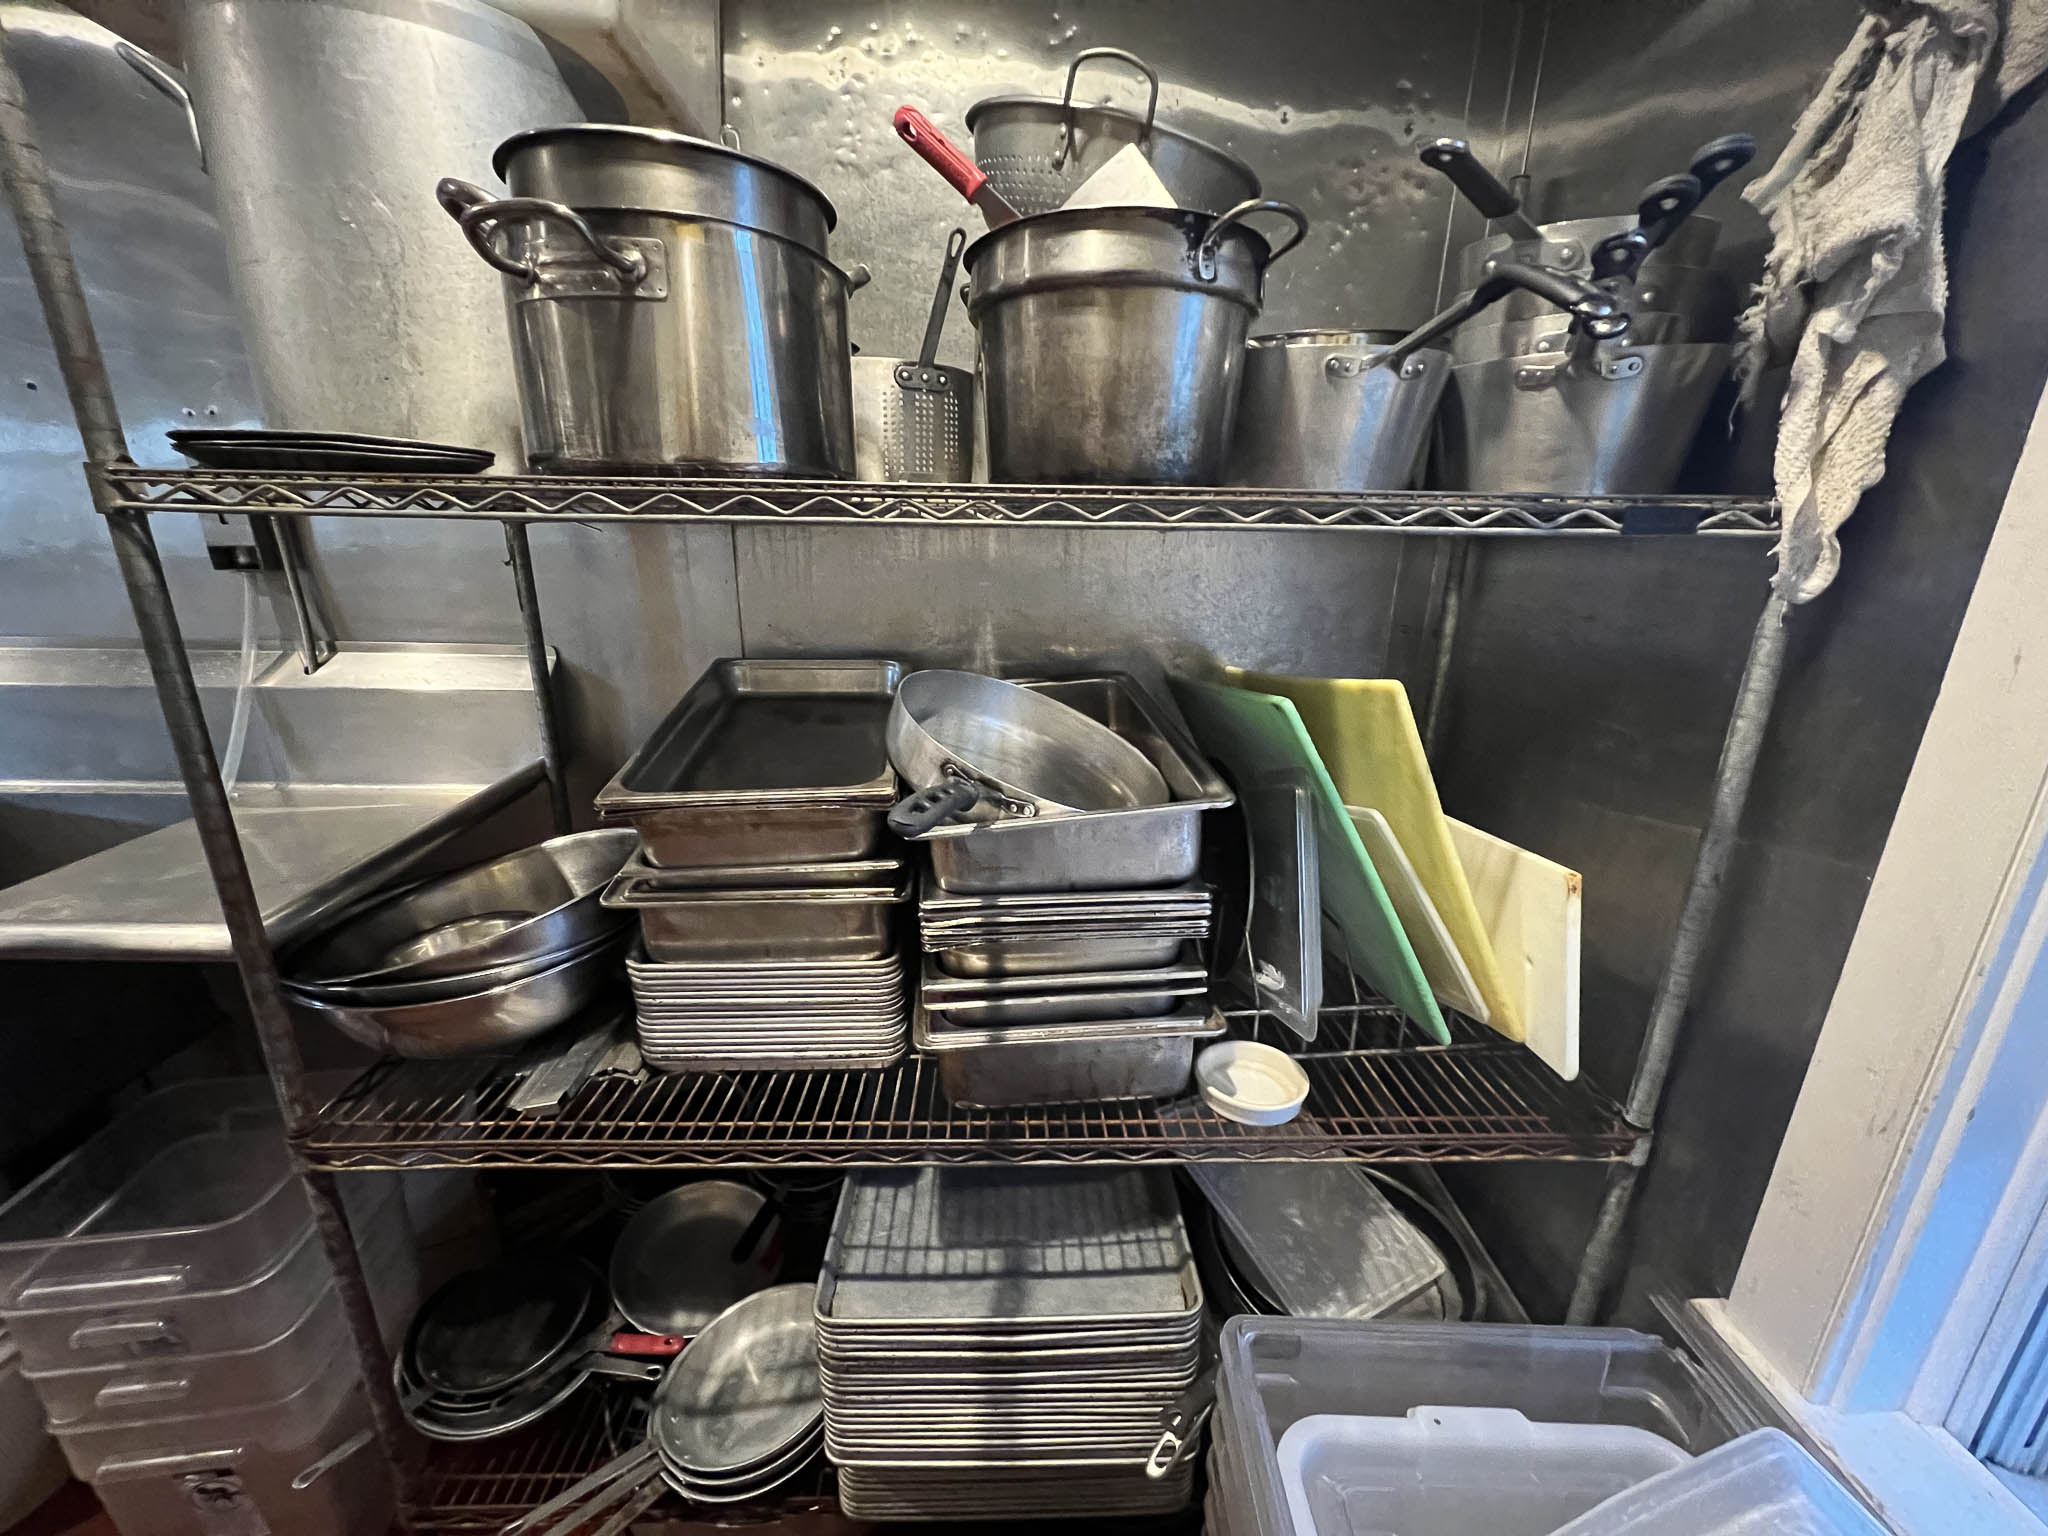 metal shelves with pots and pans